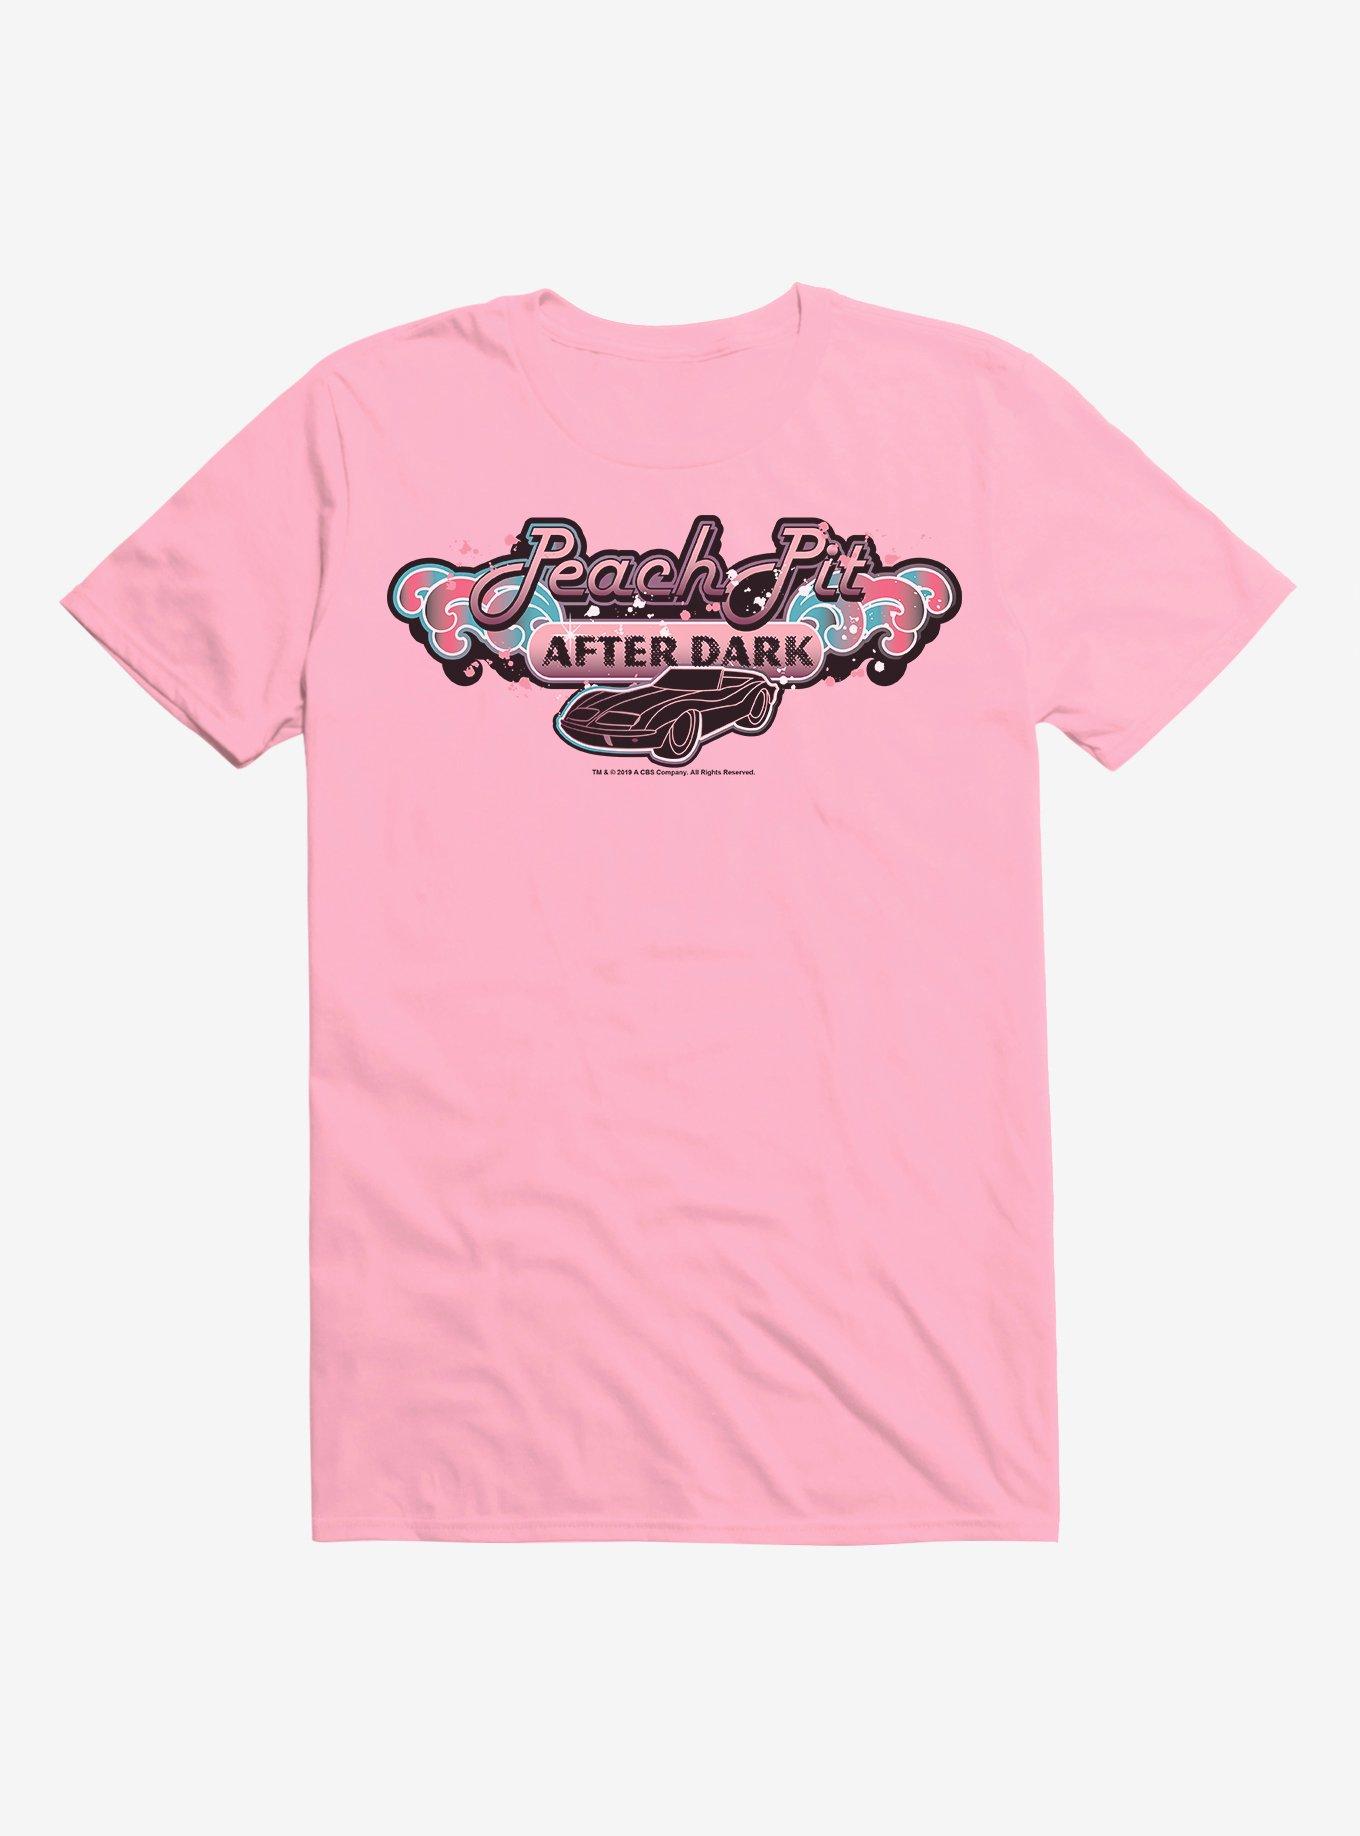 Beverly Hills 90210 Peach Pit After Dark T-Shirt, CHARITY PINK, hi-res